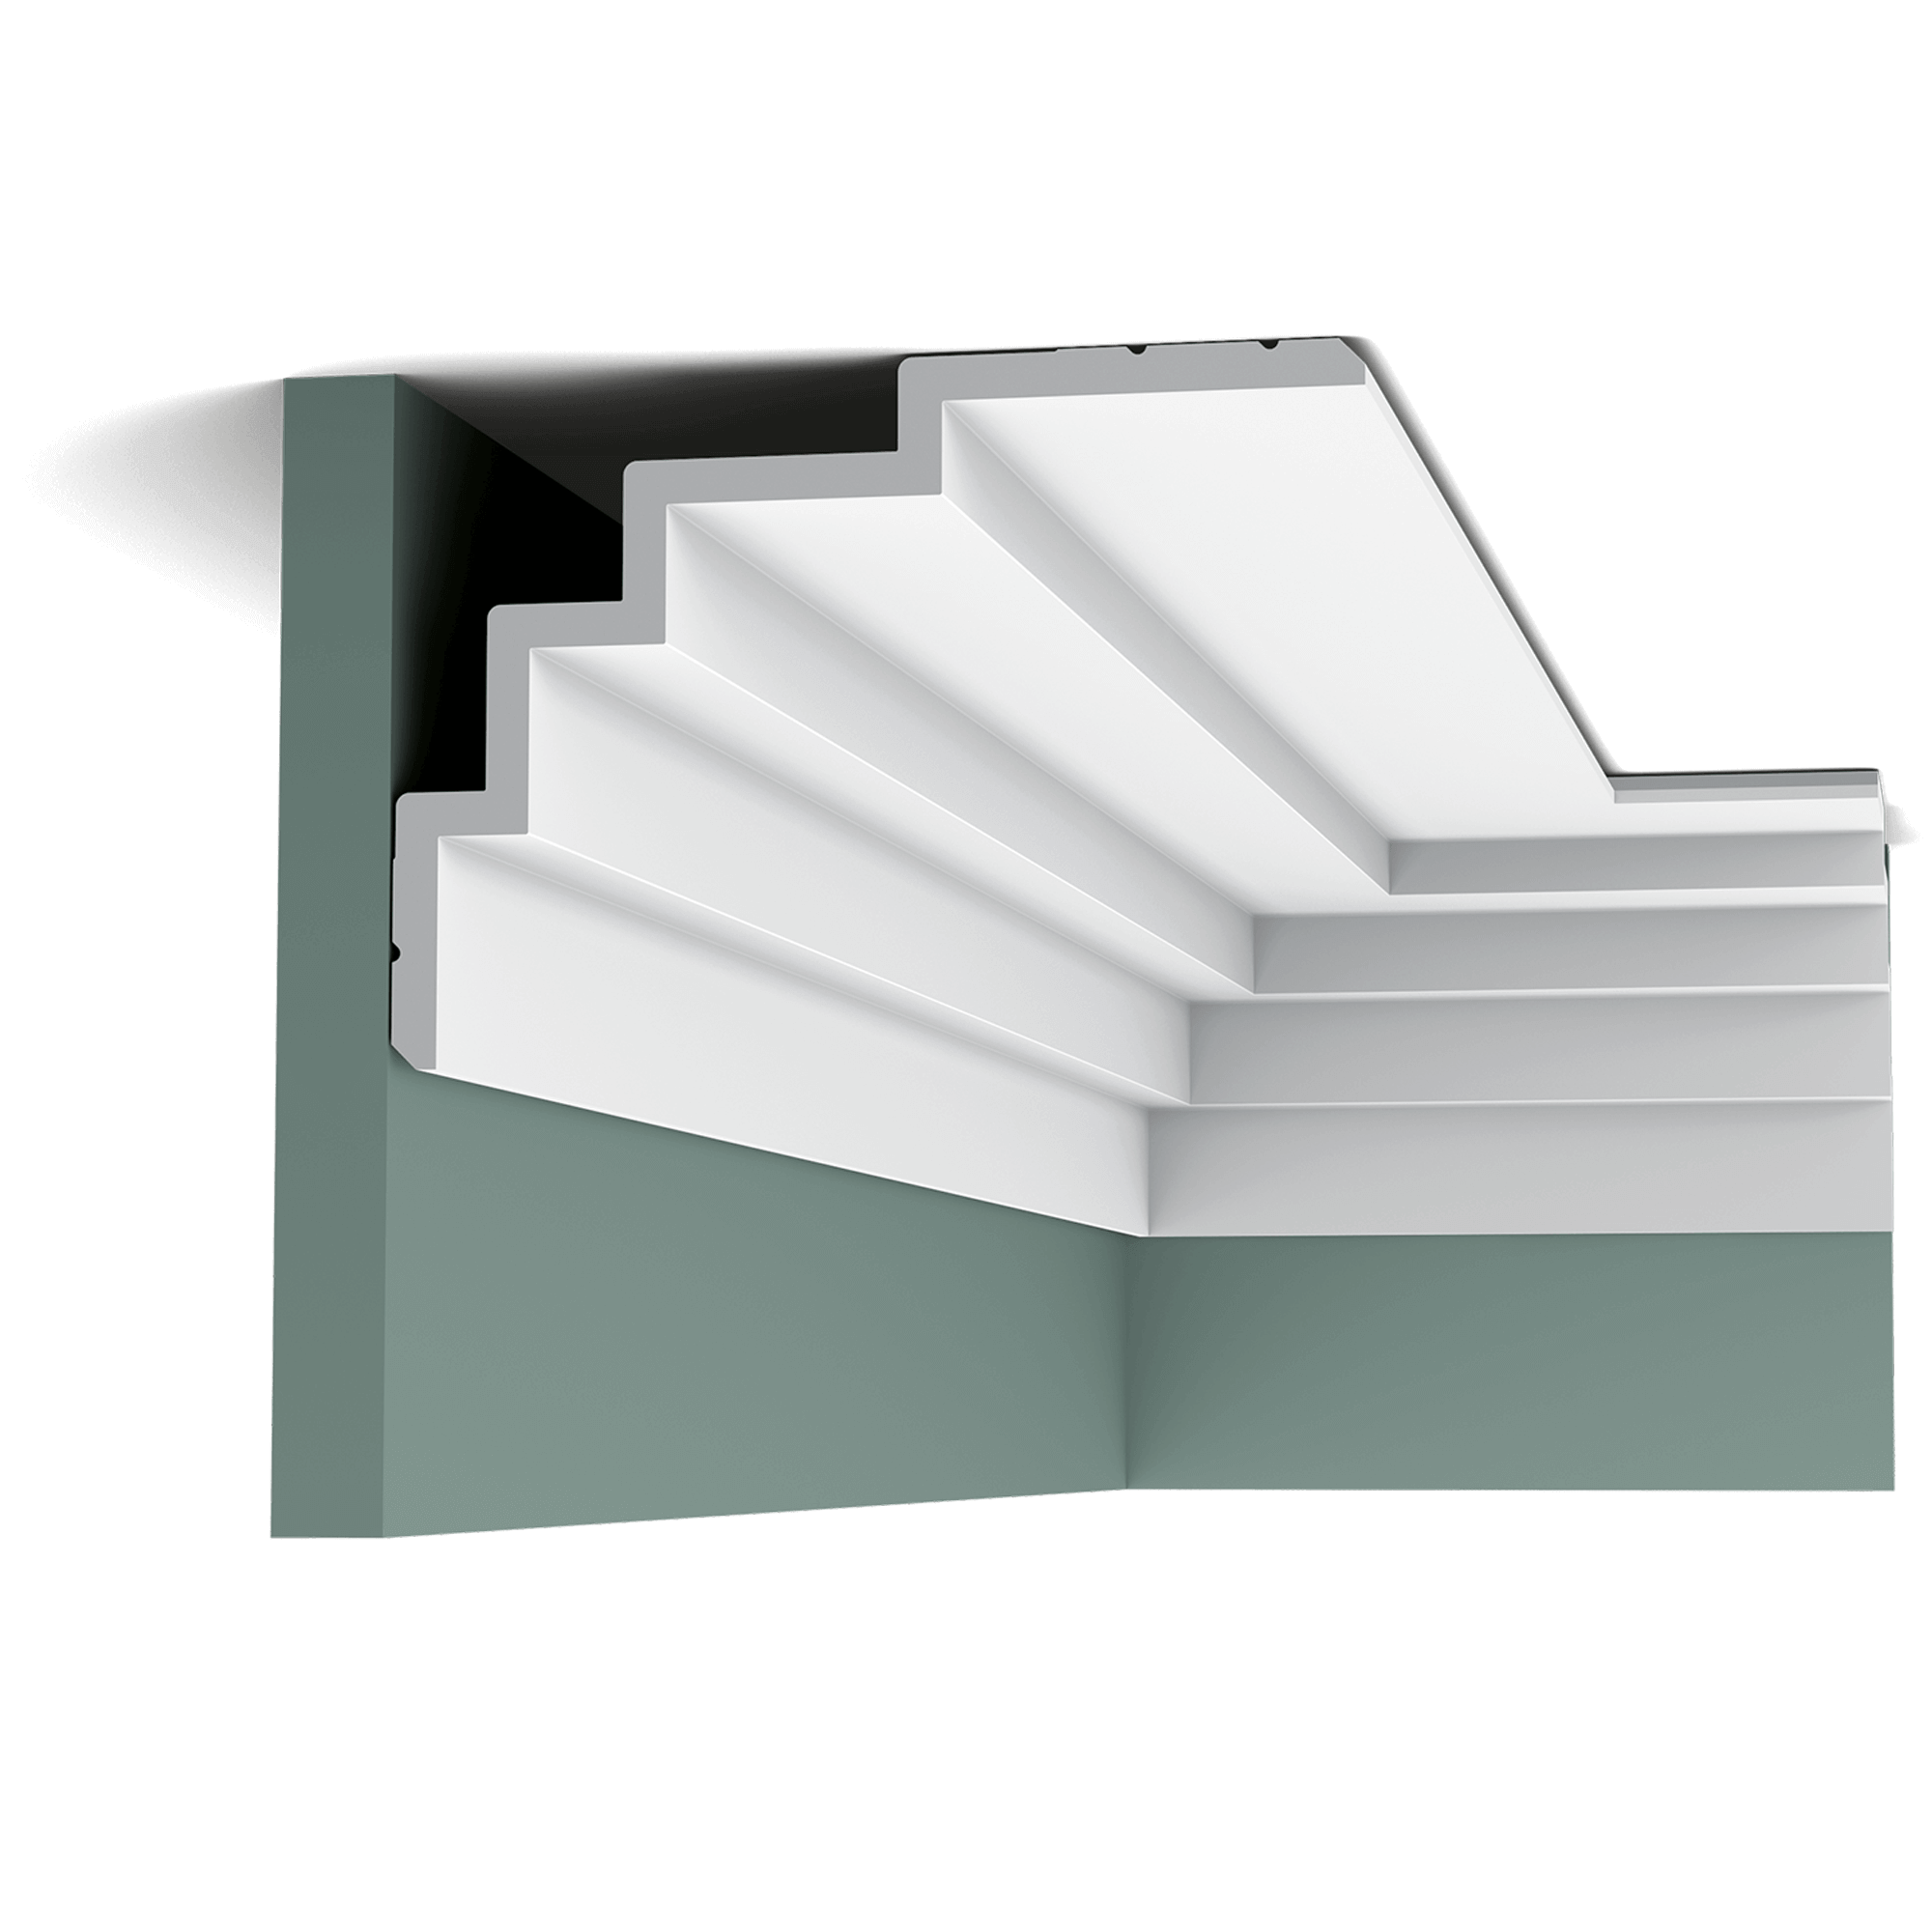 c393 cornice moulding 3d51 This clean, modern profile is the foundation of the Steps range. Here we fix the largest section to the ceiling, making the space seem wider. The angled corners above and below provide additional subtle shadow lines. Designed by Orio Tonini.